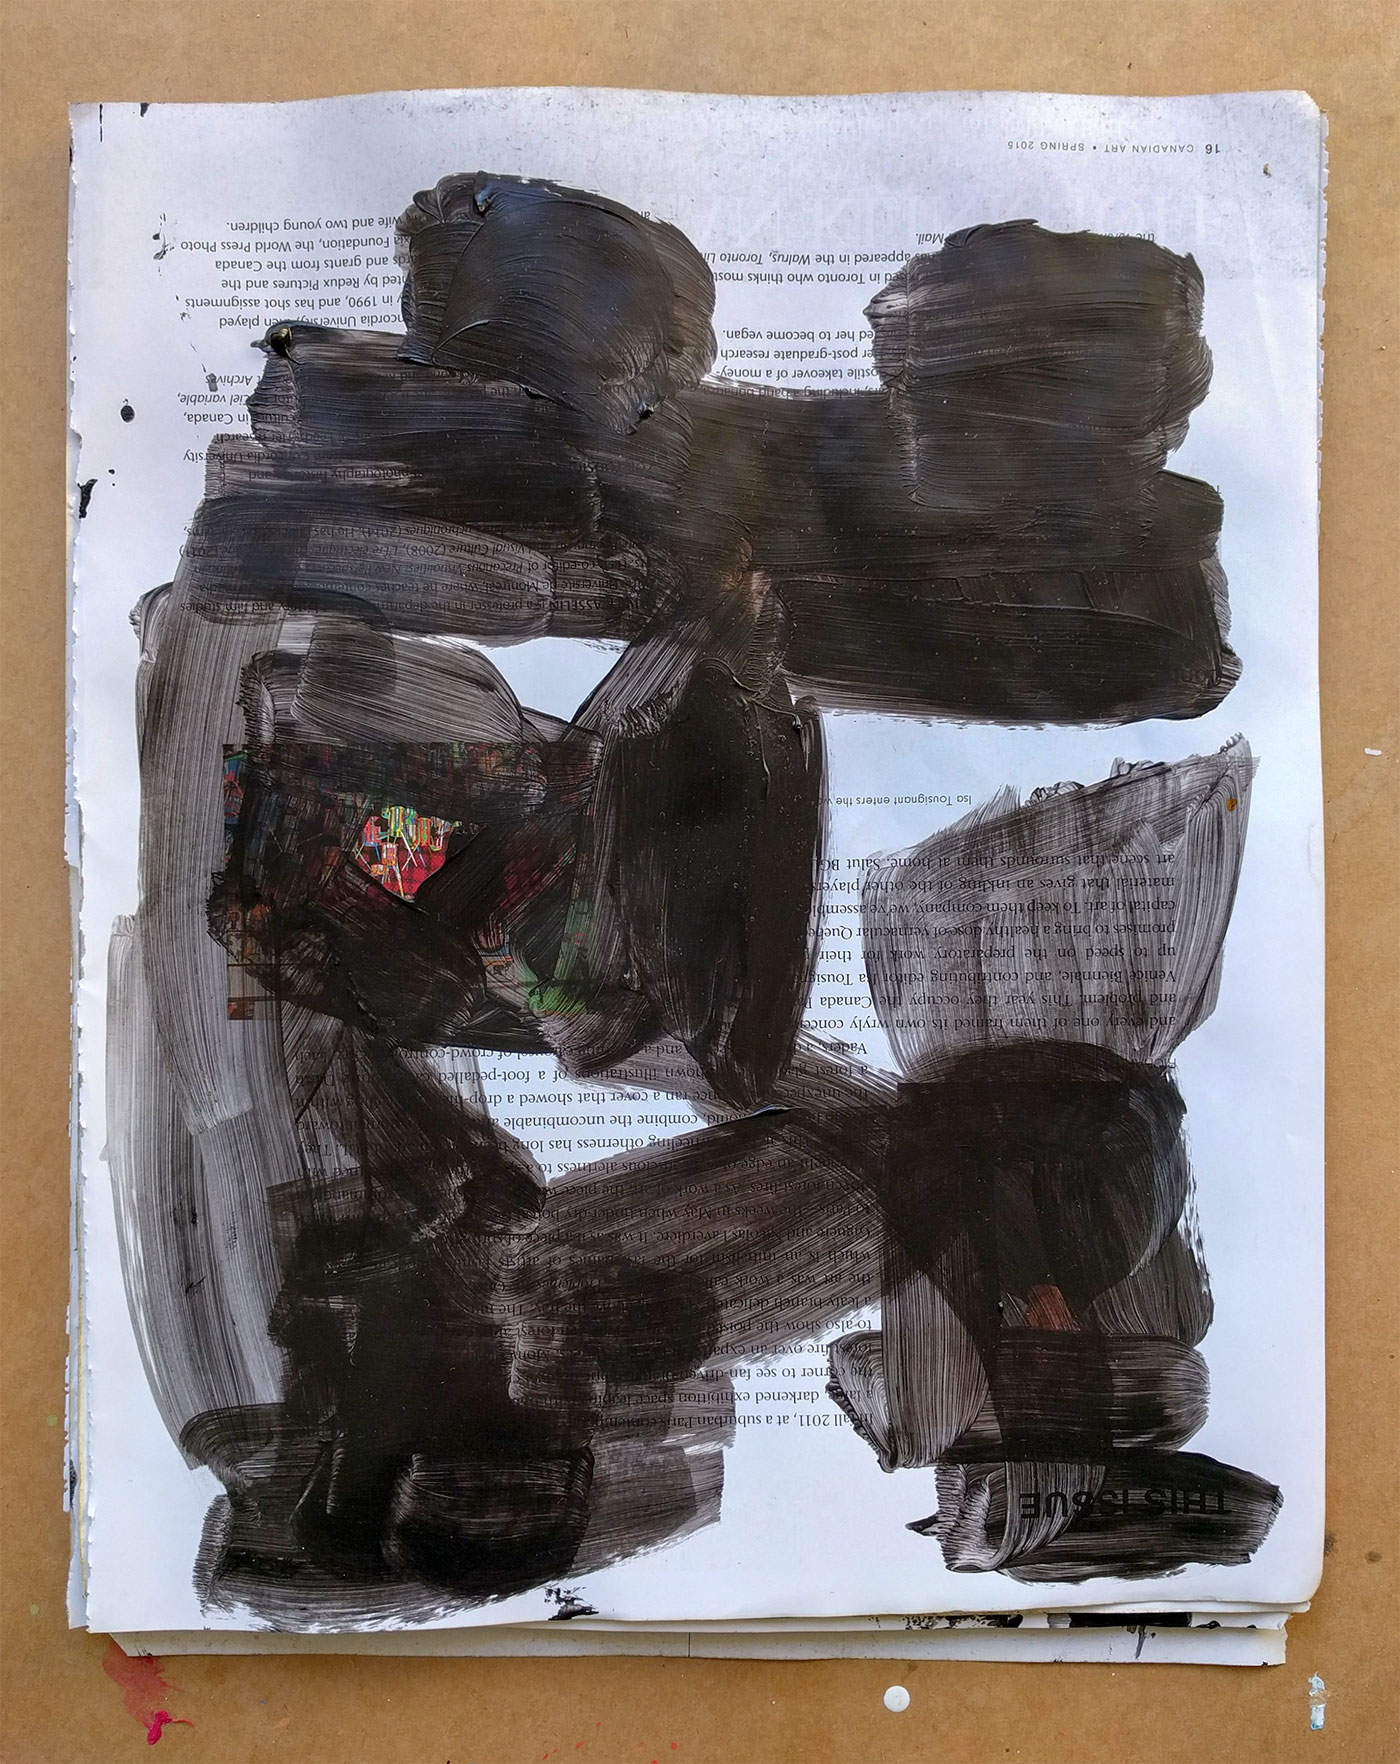 Blackout drawing - black acrylic on glossy art magazine page obscuring any images of art or people. 